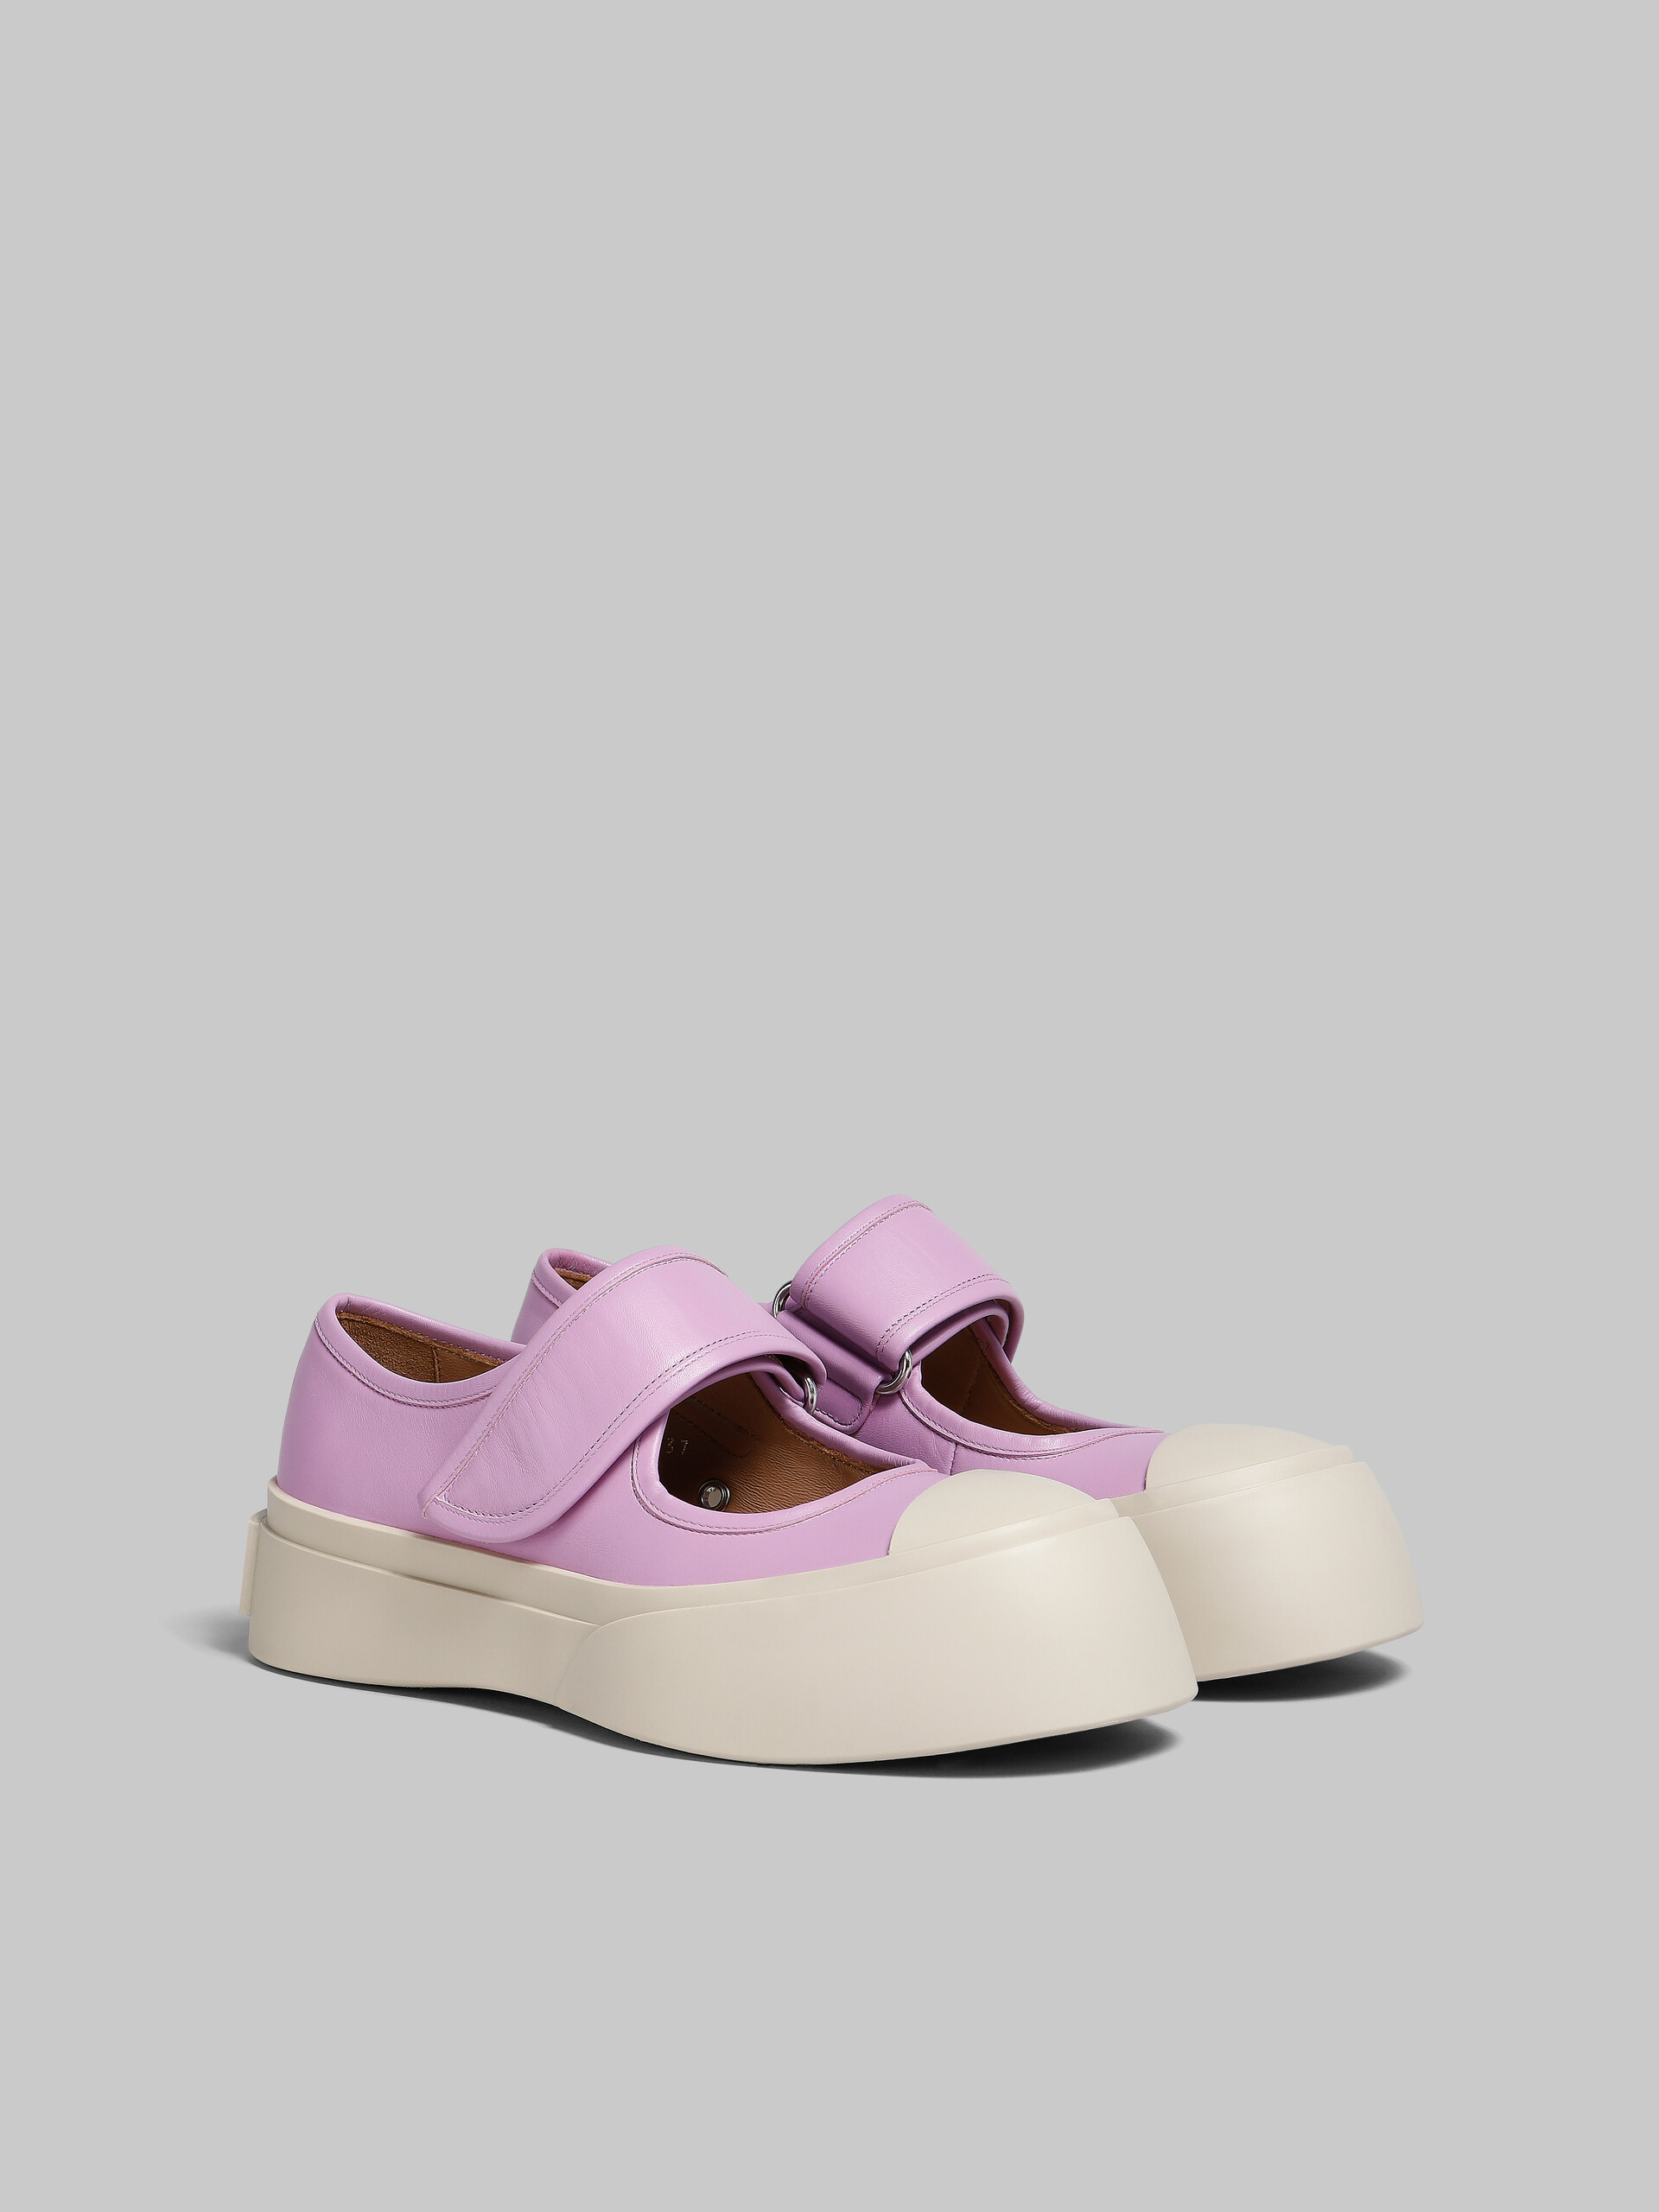 Lilac nappa leather Mary Jane sneaker - Sneakers - Image 2